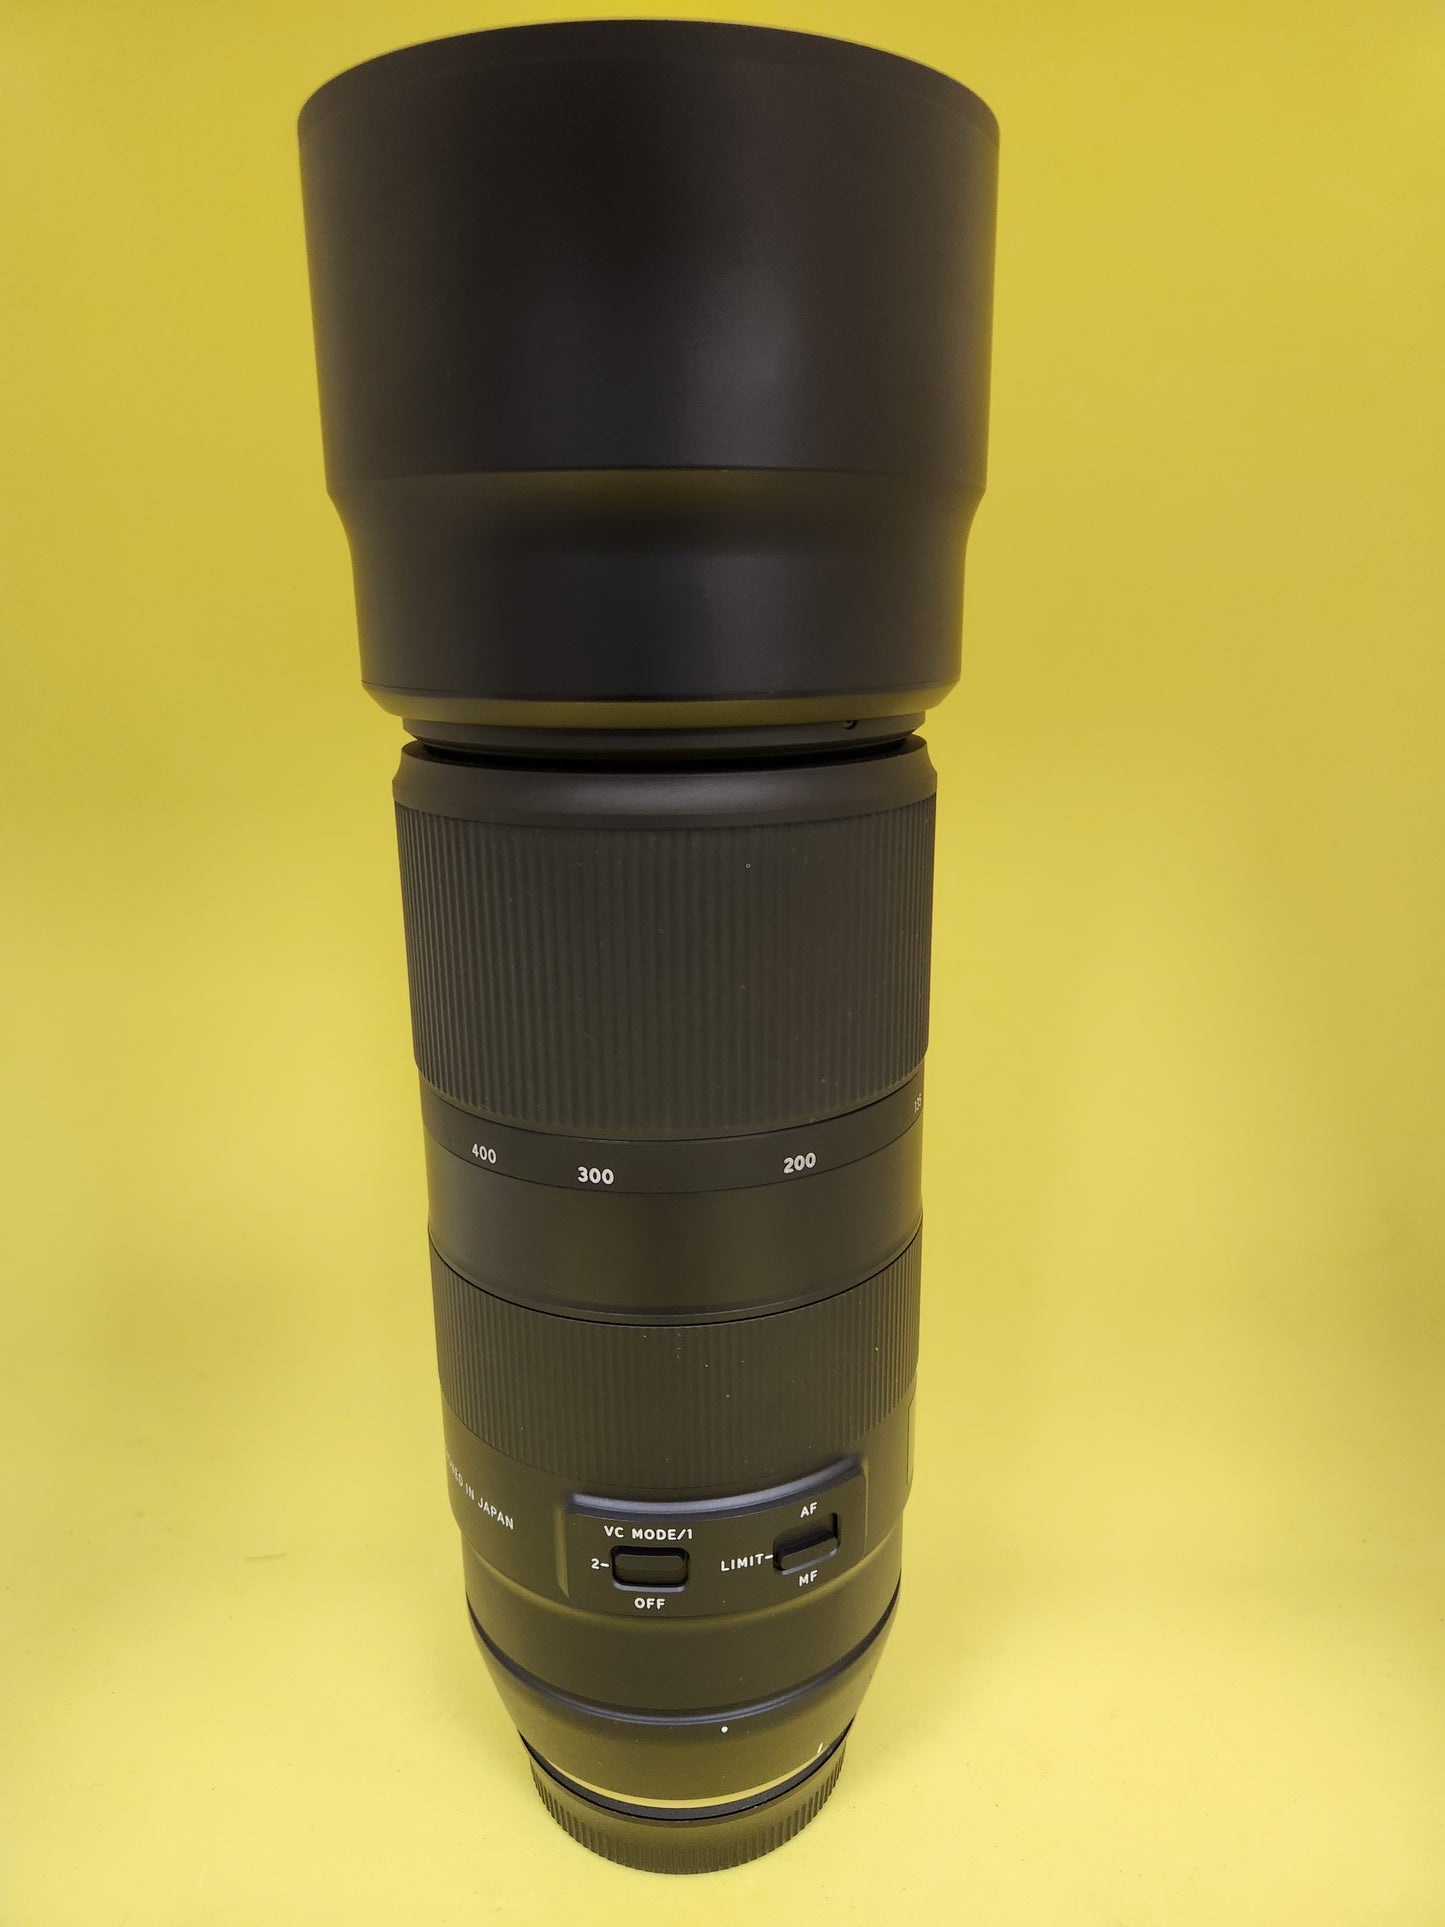 Tamron lens 100-400mm f4.5-6.3 used Di VC Canon EF Mount